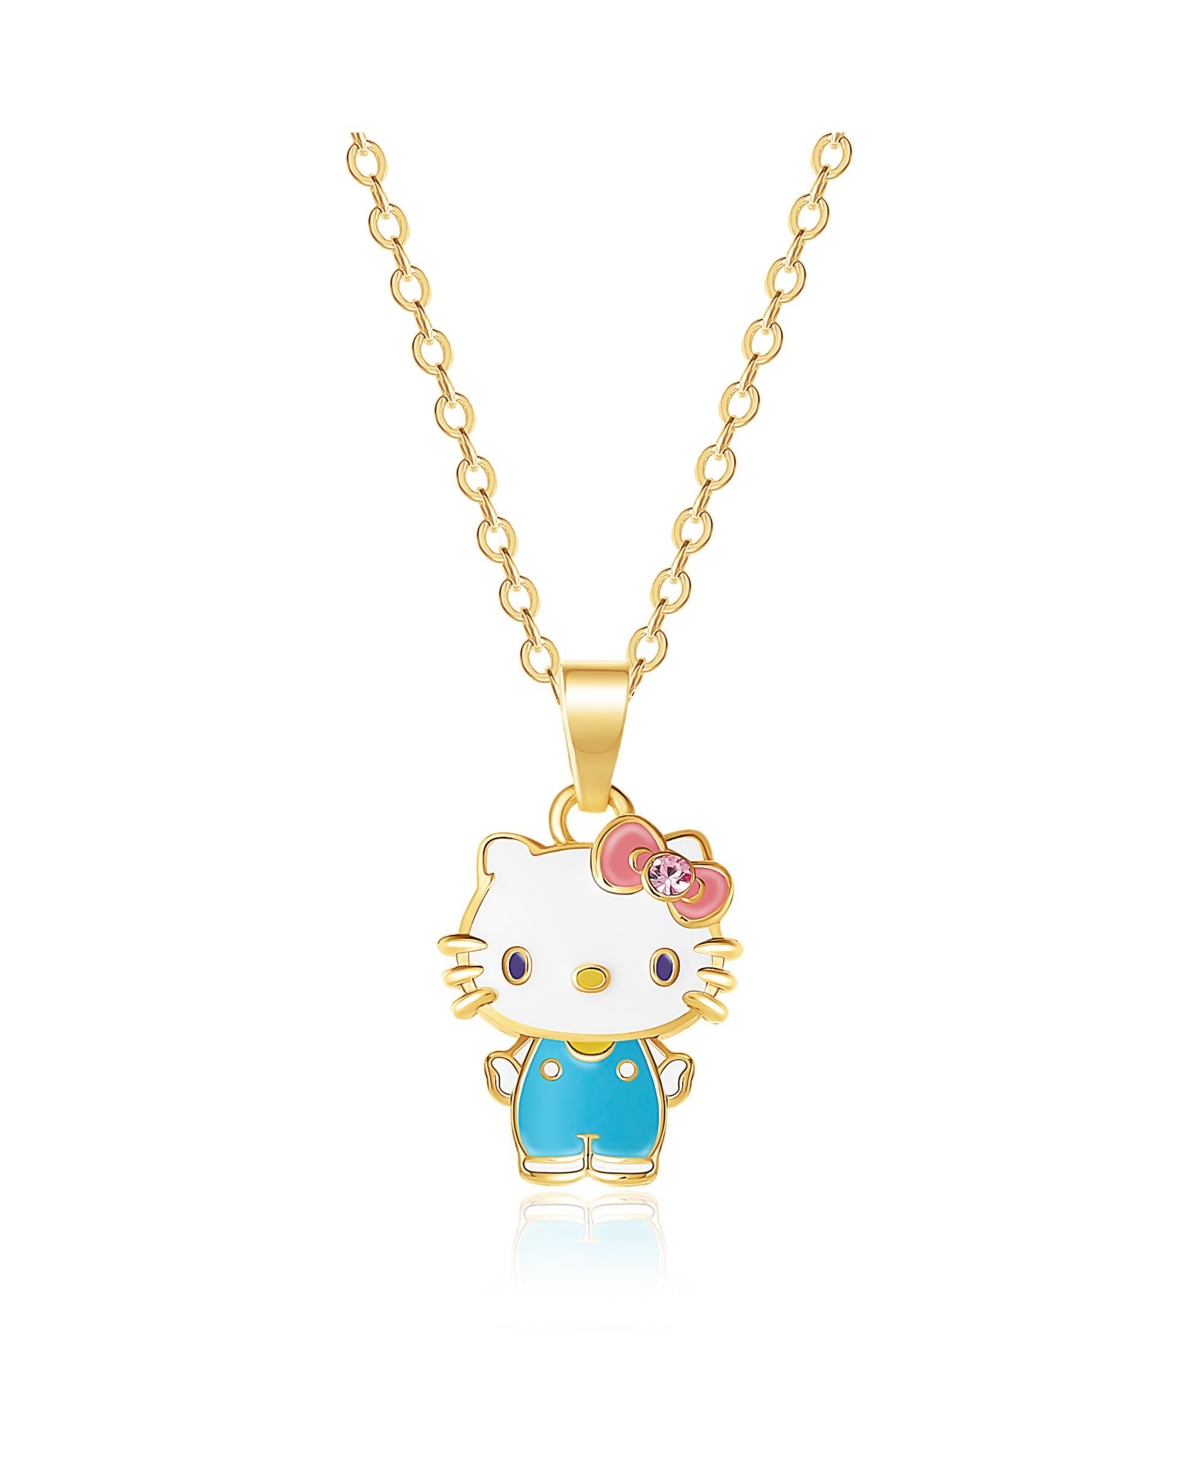 Sanrio Yellow Gold Flash Plated and Pink Crystal Pendant - 18'' Chain, Officially Licensed Authentic - Gold, white, blue